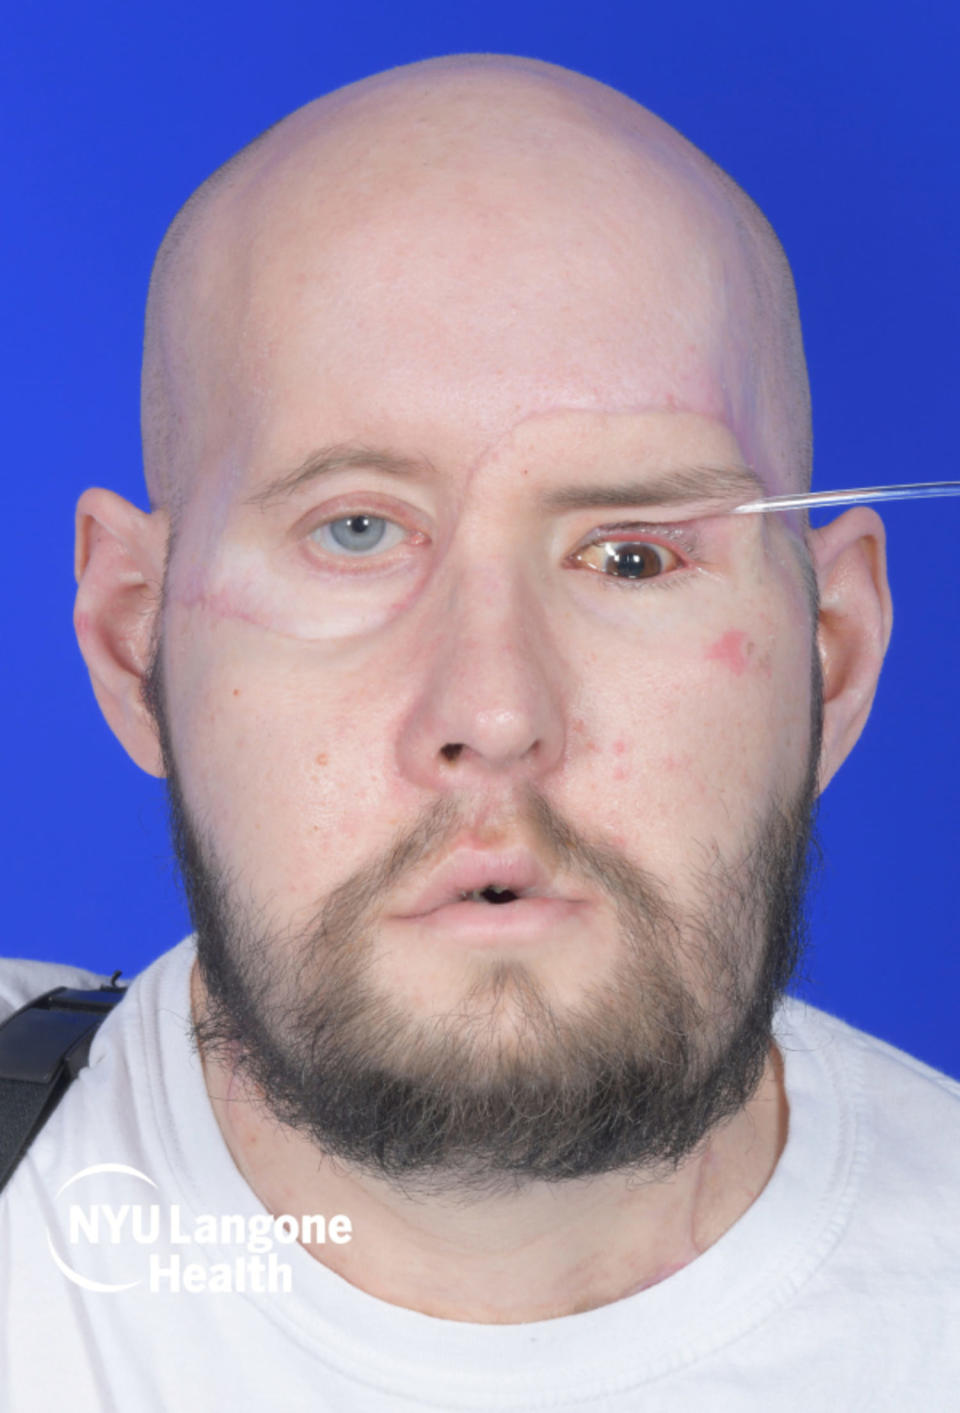 Aaron James after the face and whole eye transplant. (NYU Langone Health)